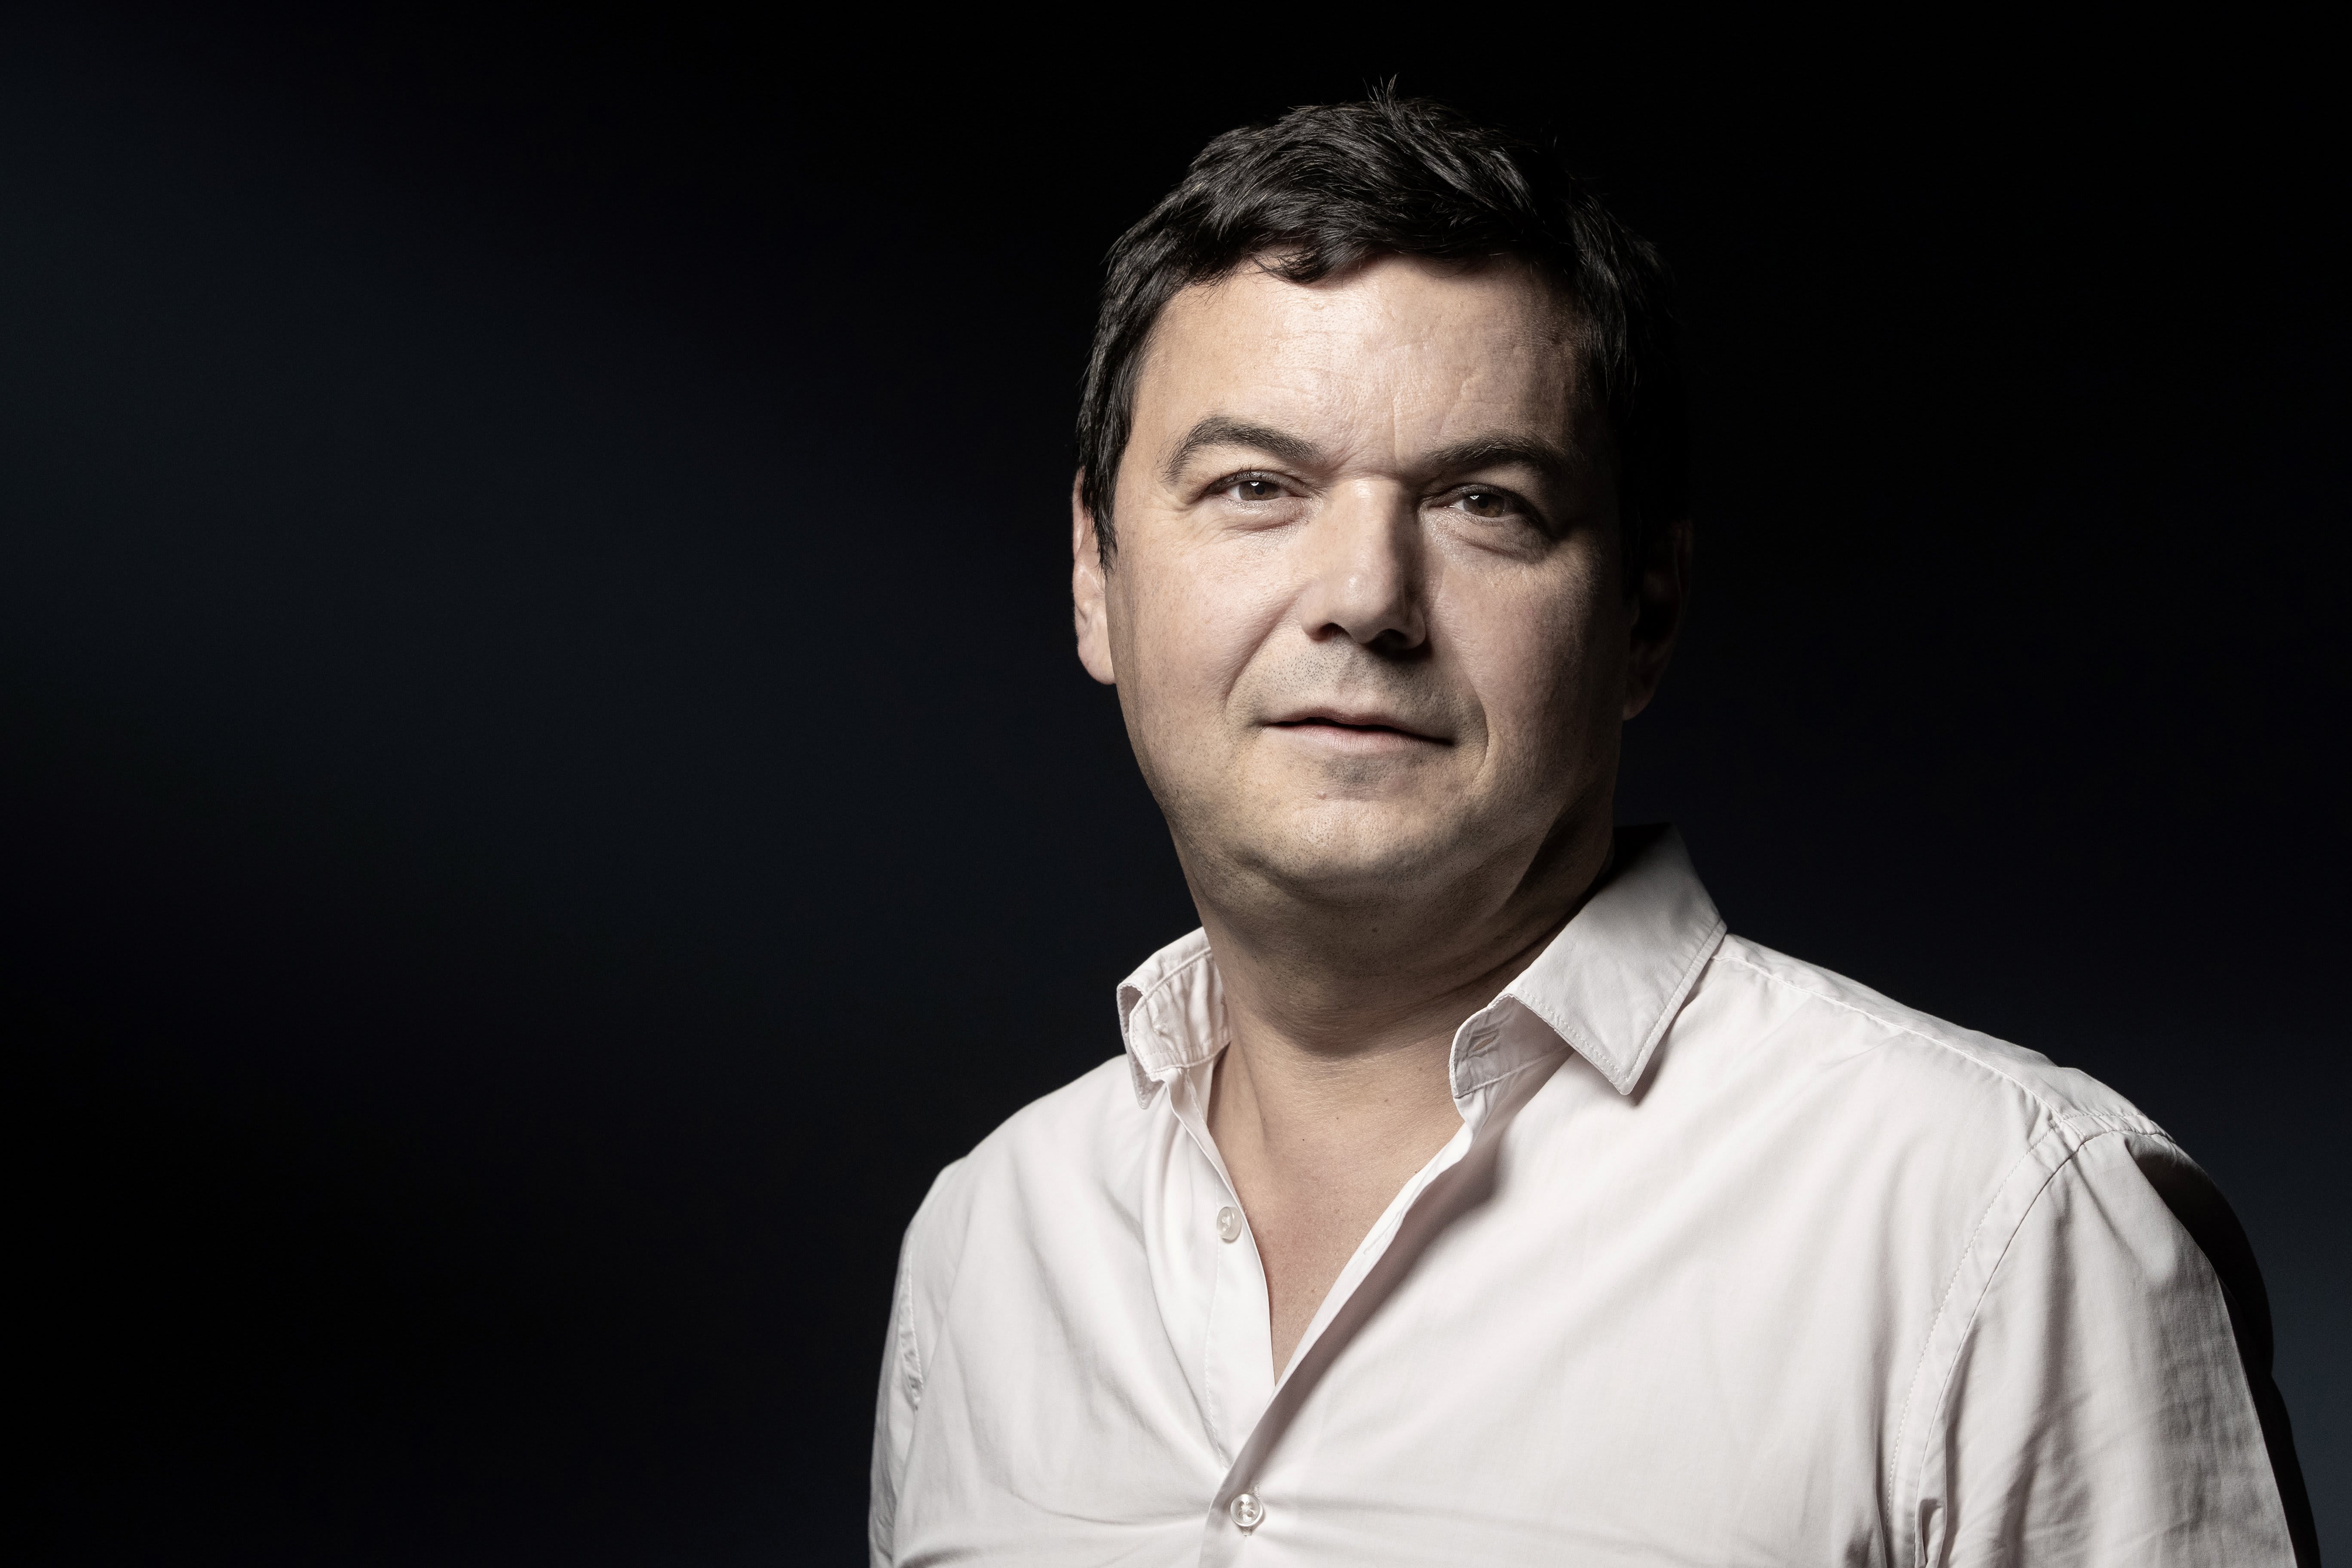 Billionaires should be taxed out of existence, says Thomas Piketty